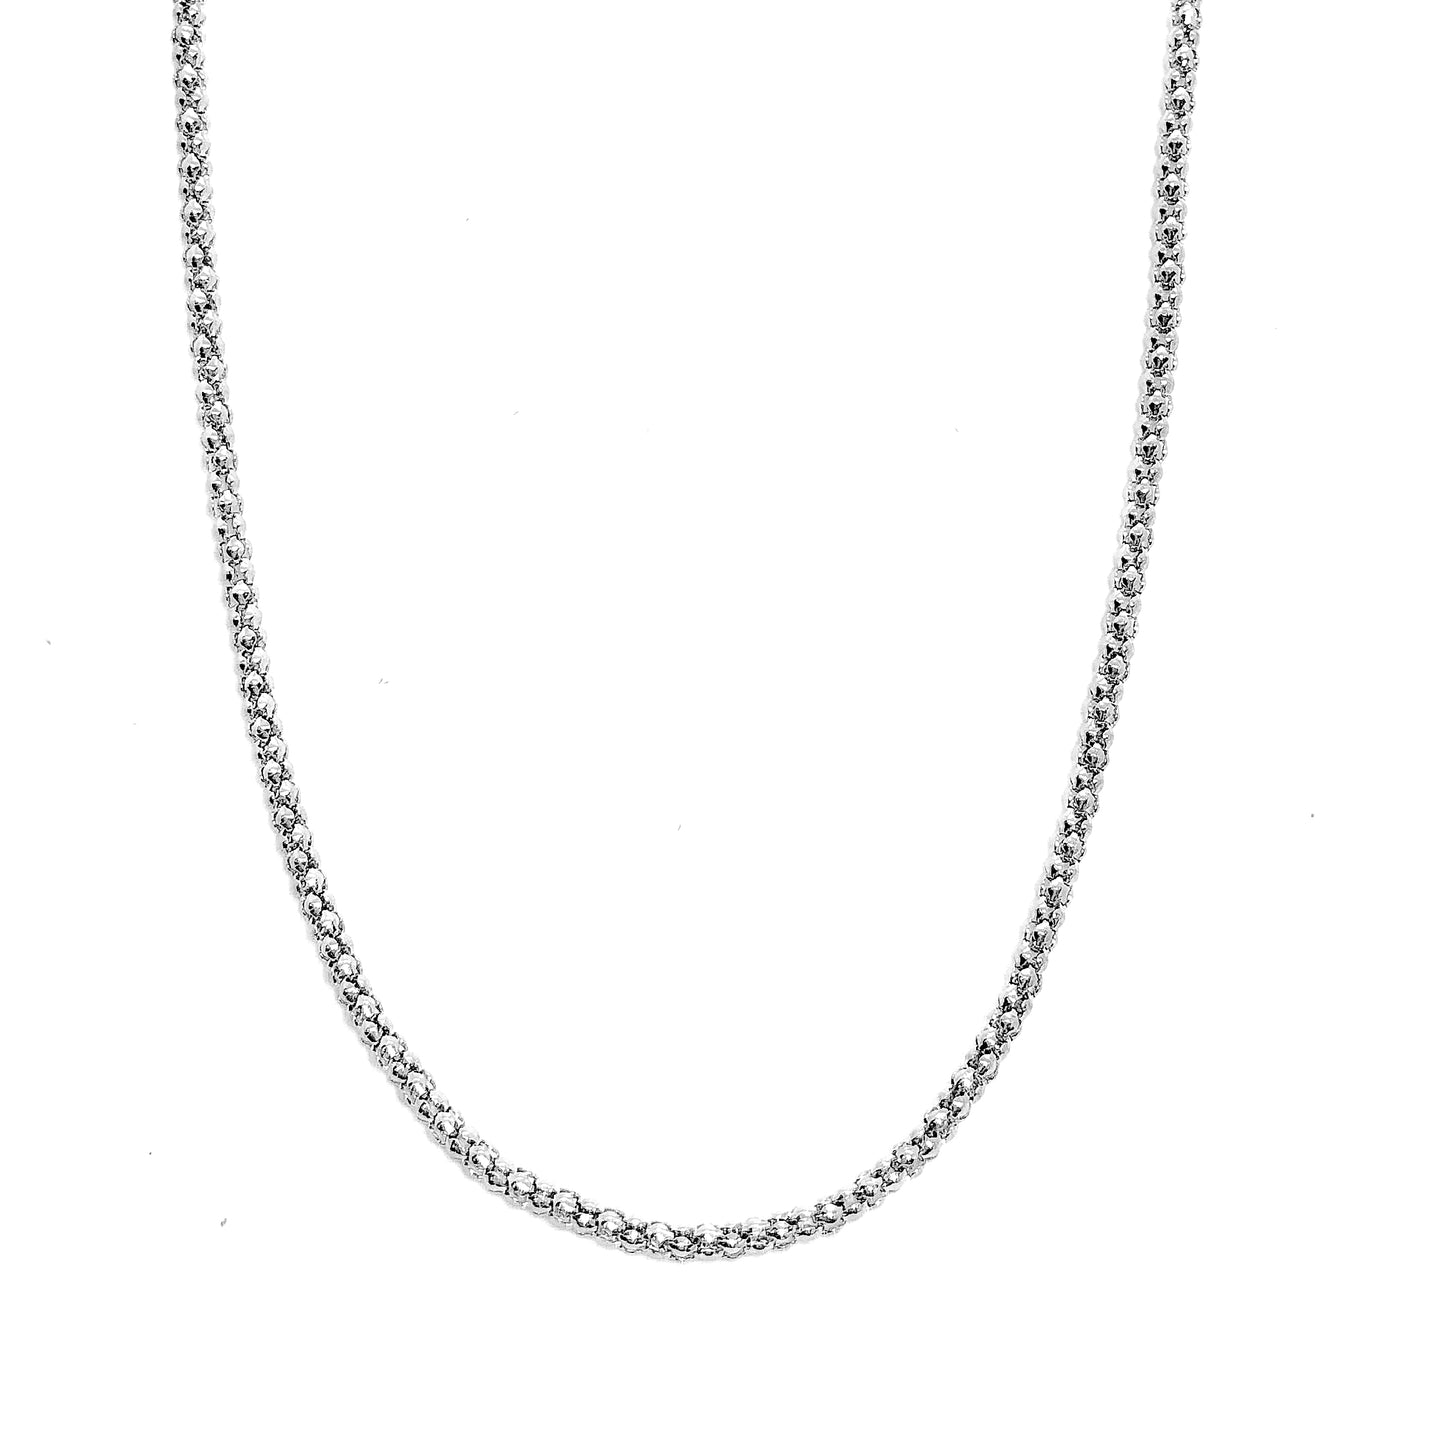 ON SALE - 20 inch Stainless Steel Popcorn Link Chain